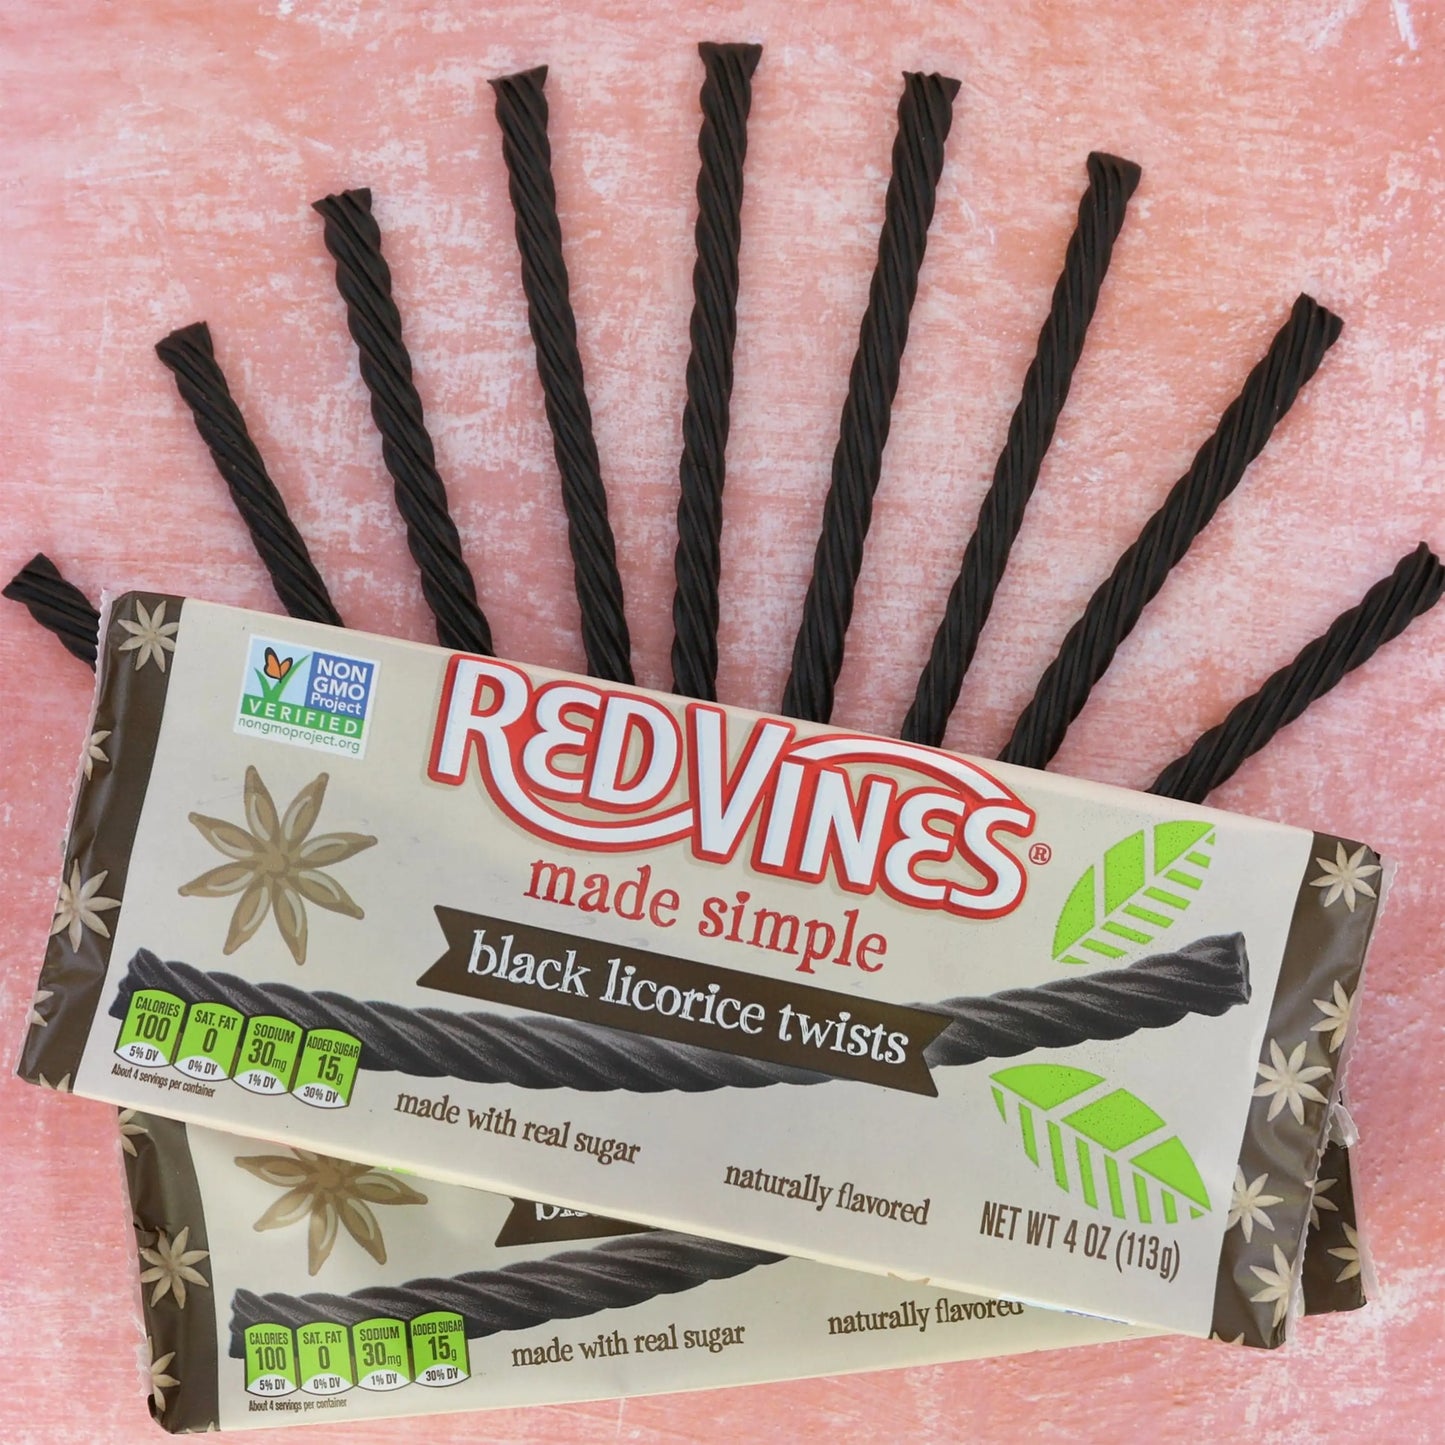 Two RED VINES Made Simple Black Licorice Twists 4oz Trays with candy twists